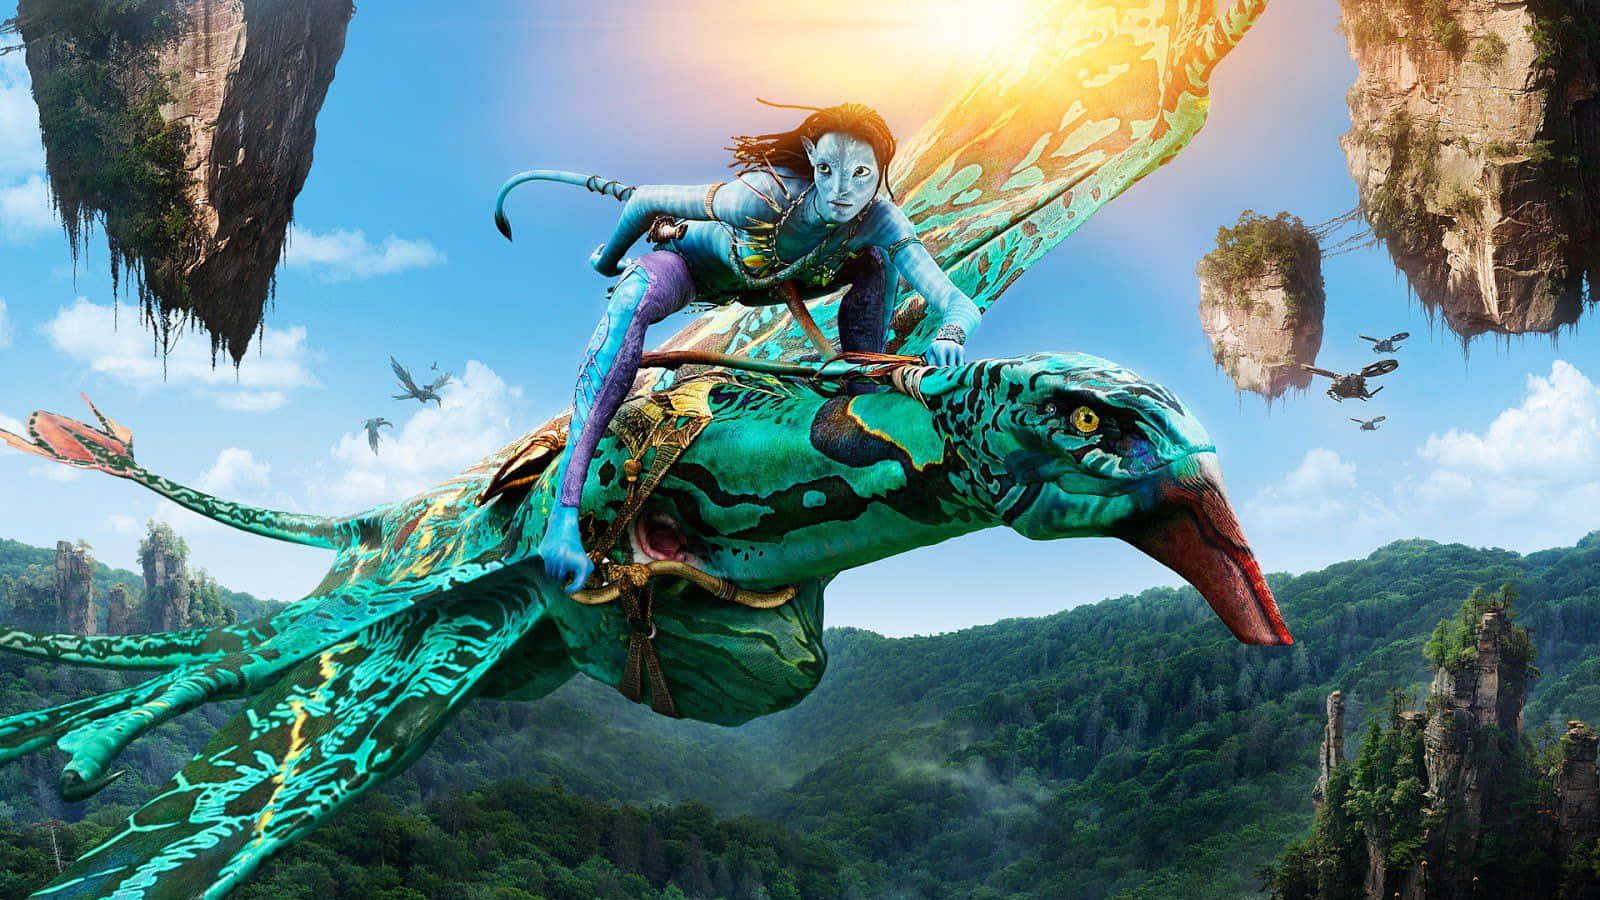 Download Avatar 2 The Way Of Water Neytiri And Seze Wallpaper | Wallpapers .com